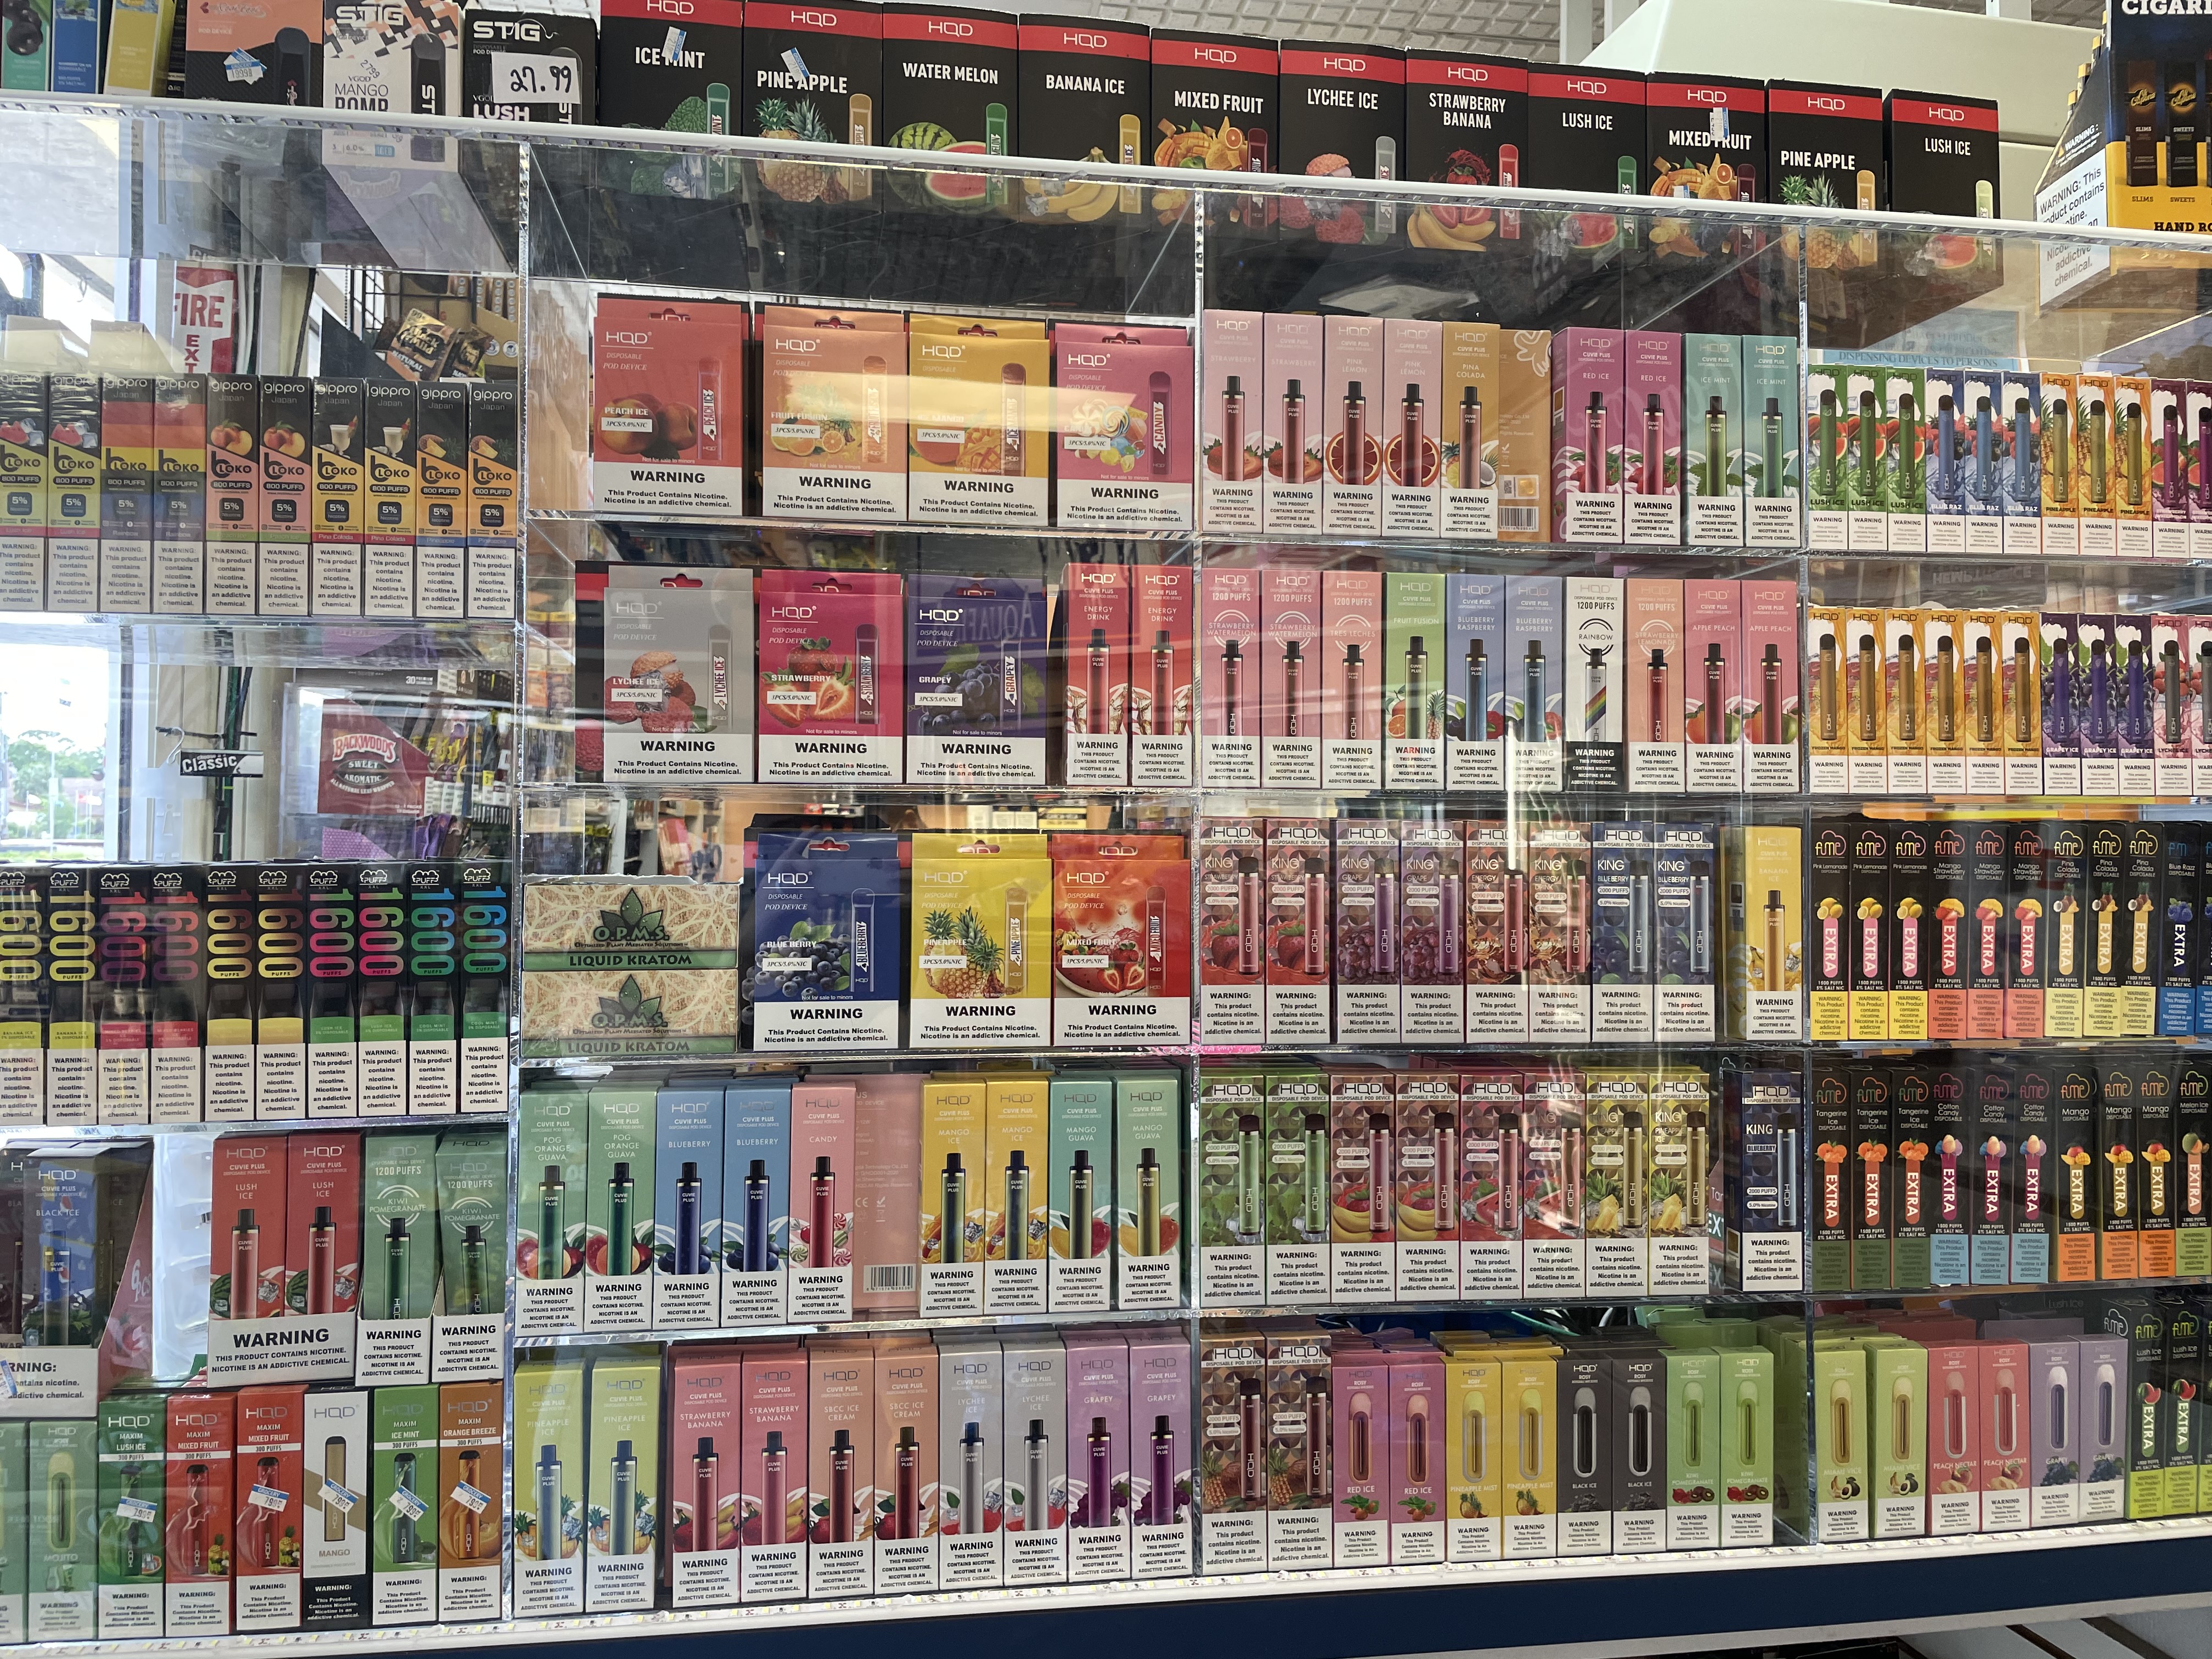 display of flavored disposable e-cigarettes 